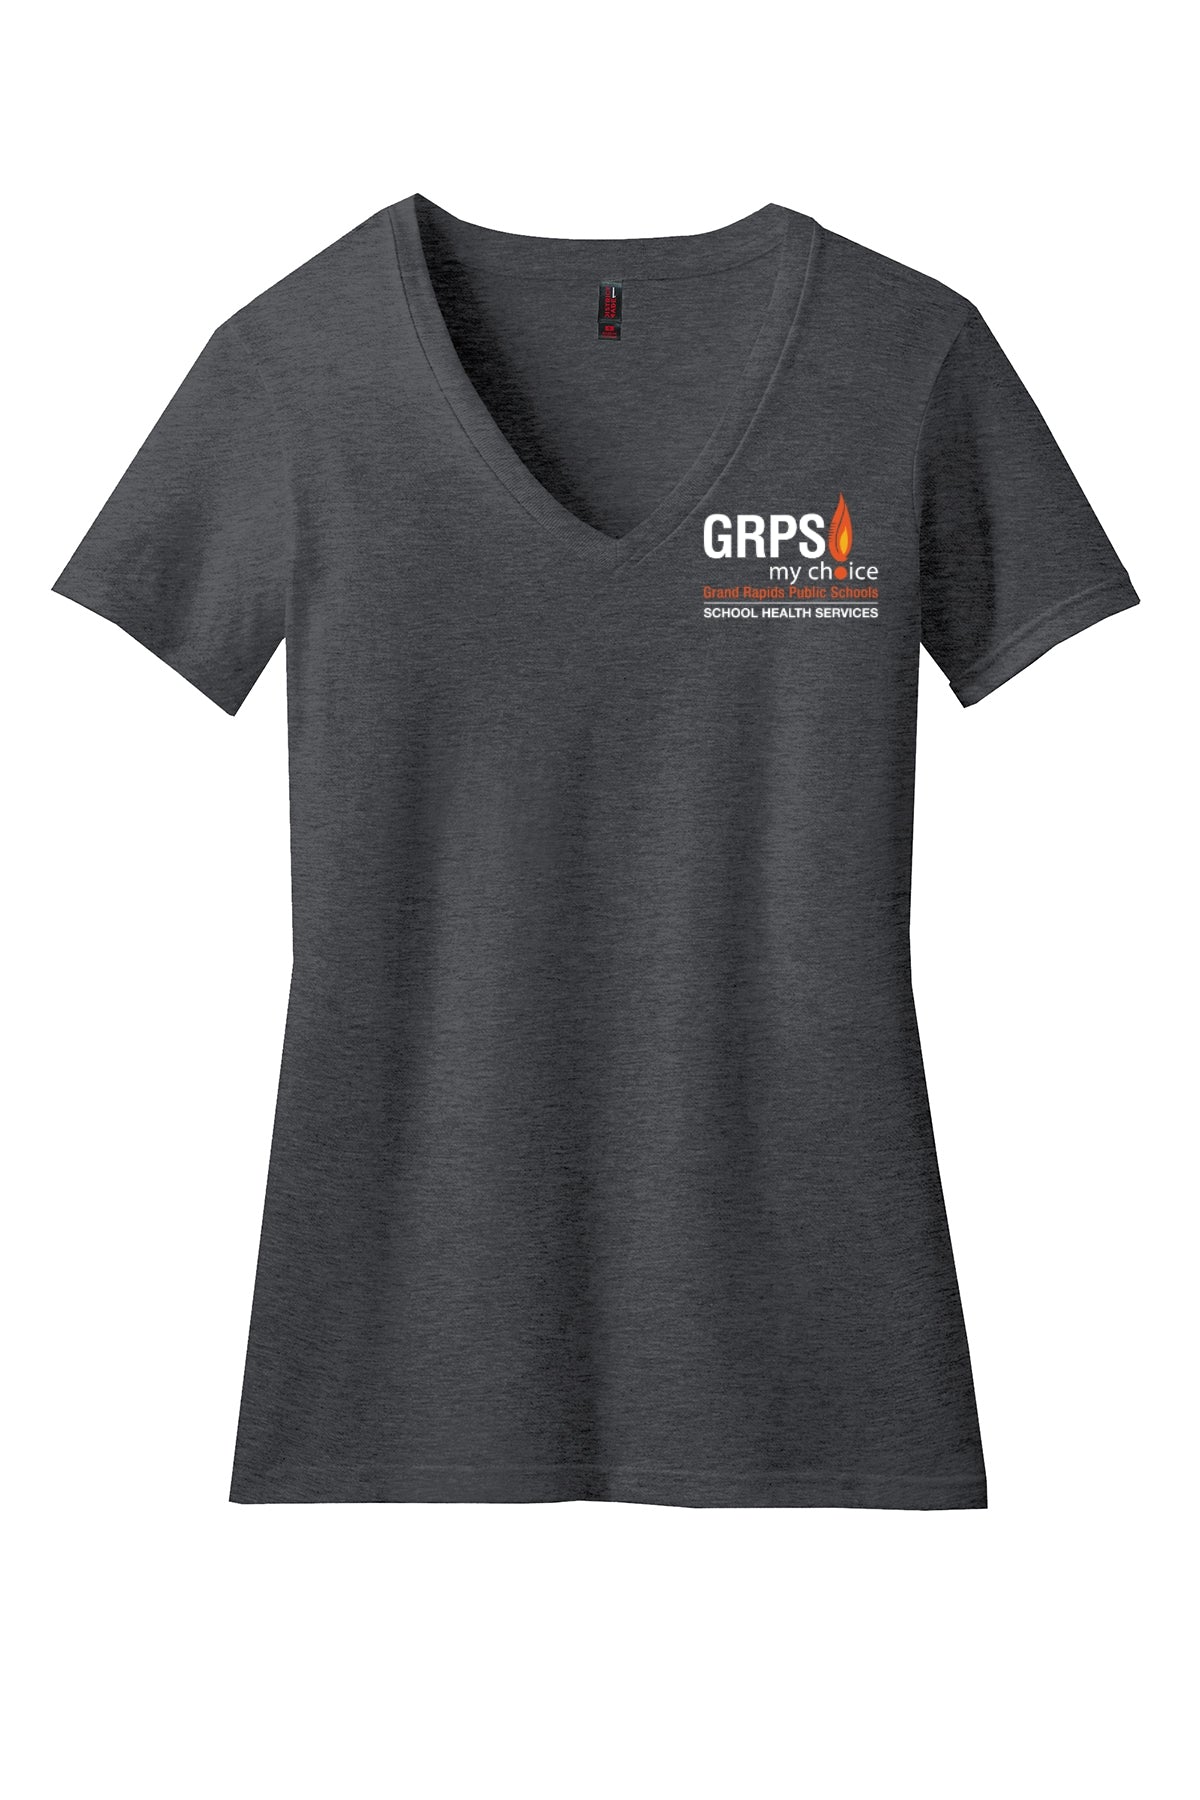 GRPS HEALTH SERVICES Women’s Perfect Blend ® V-Neck Tee